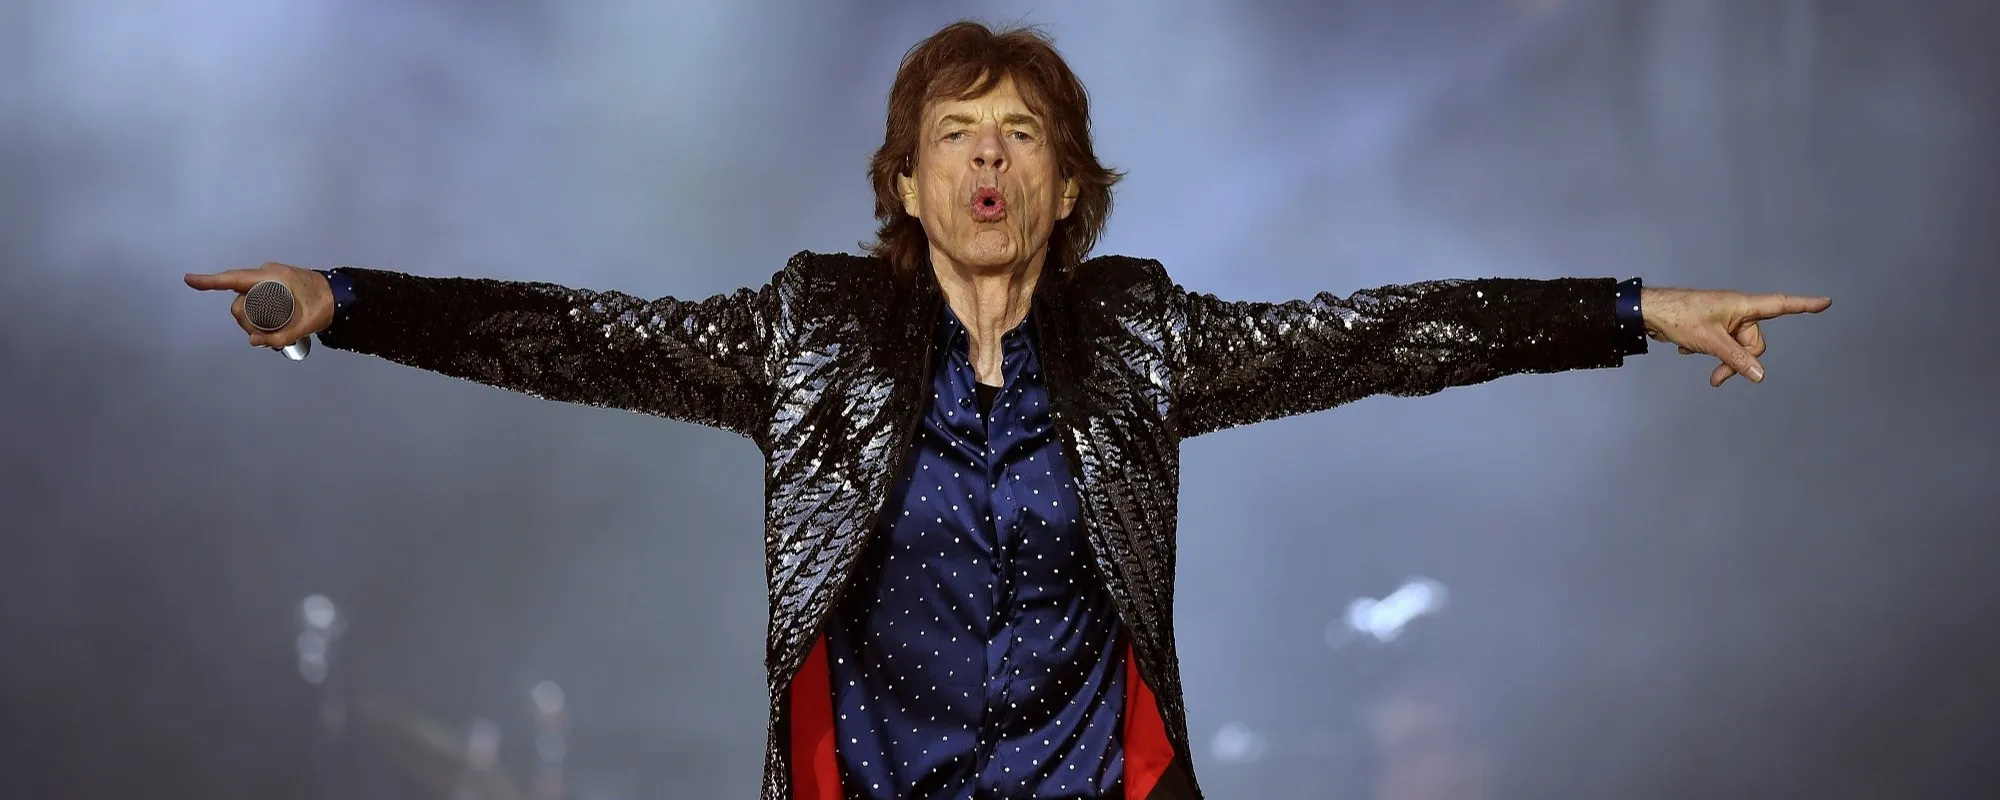 Watch Mick Jagger Rock Out on Guitar as He Prepares for The Rolling Stones’ 2024 Tour